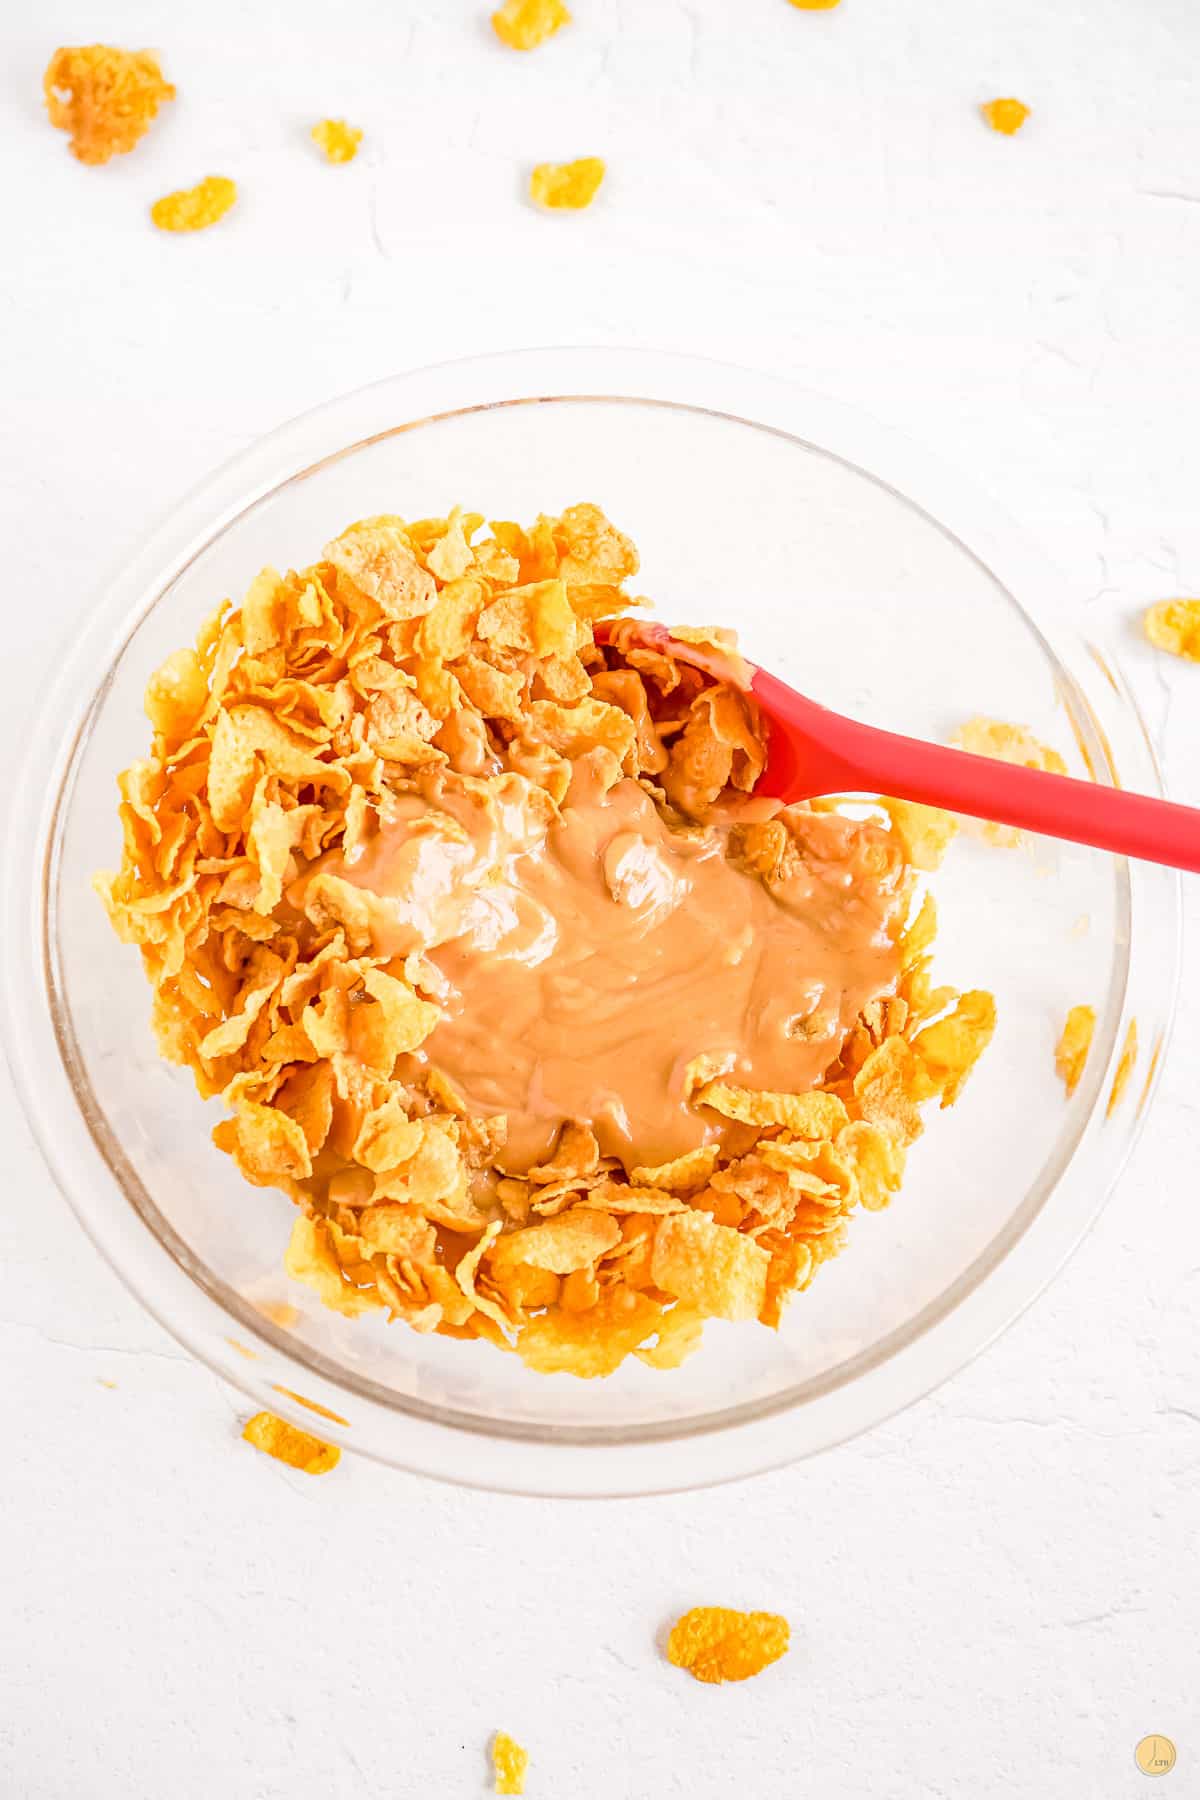 cornflakes in a bowl with red spatula